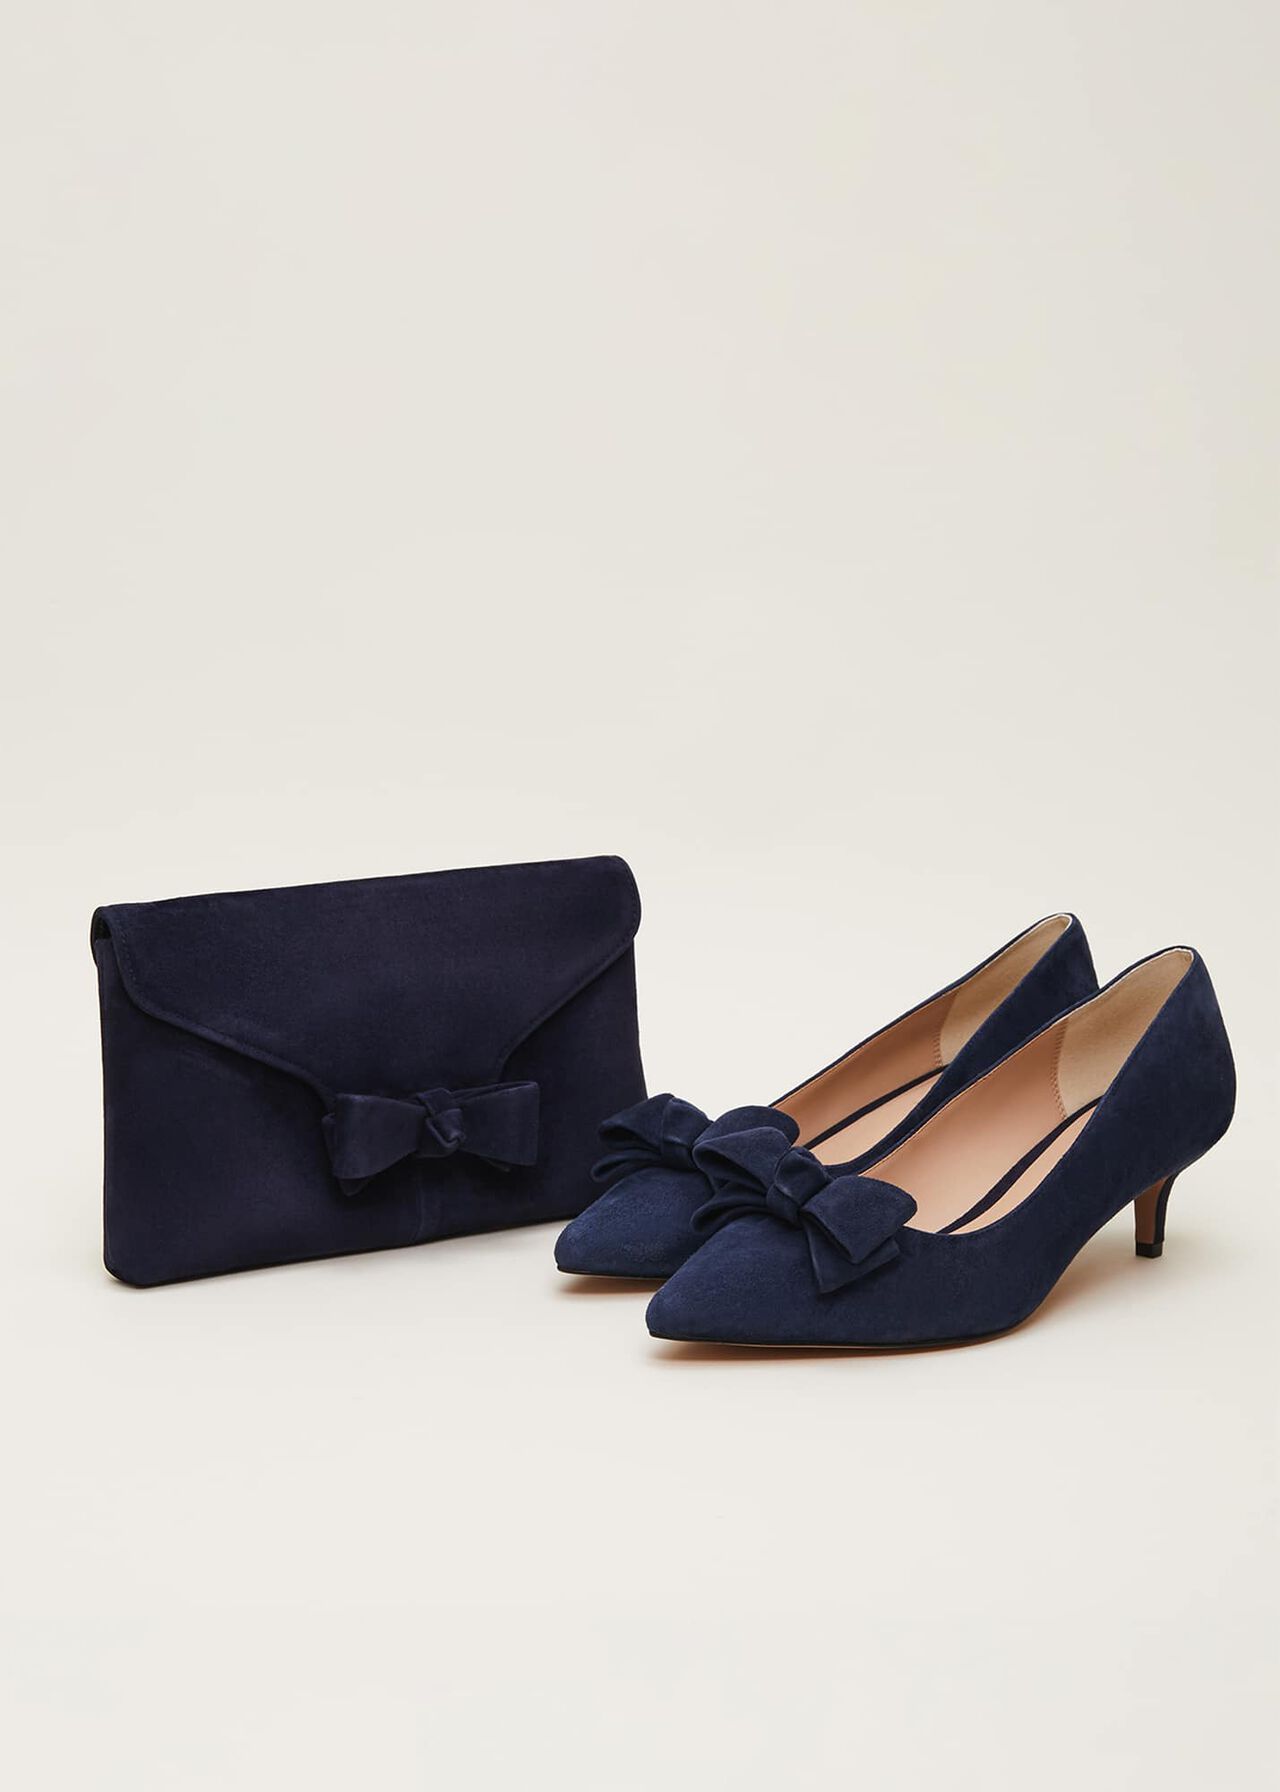 Structured Bow Clutch